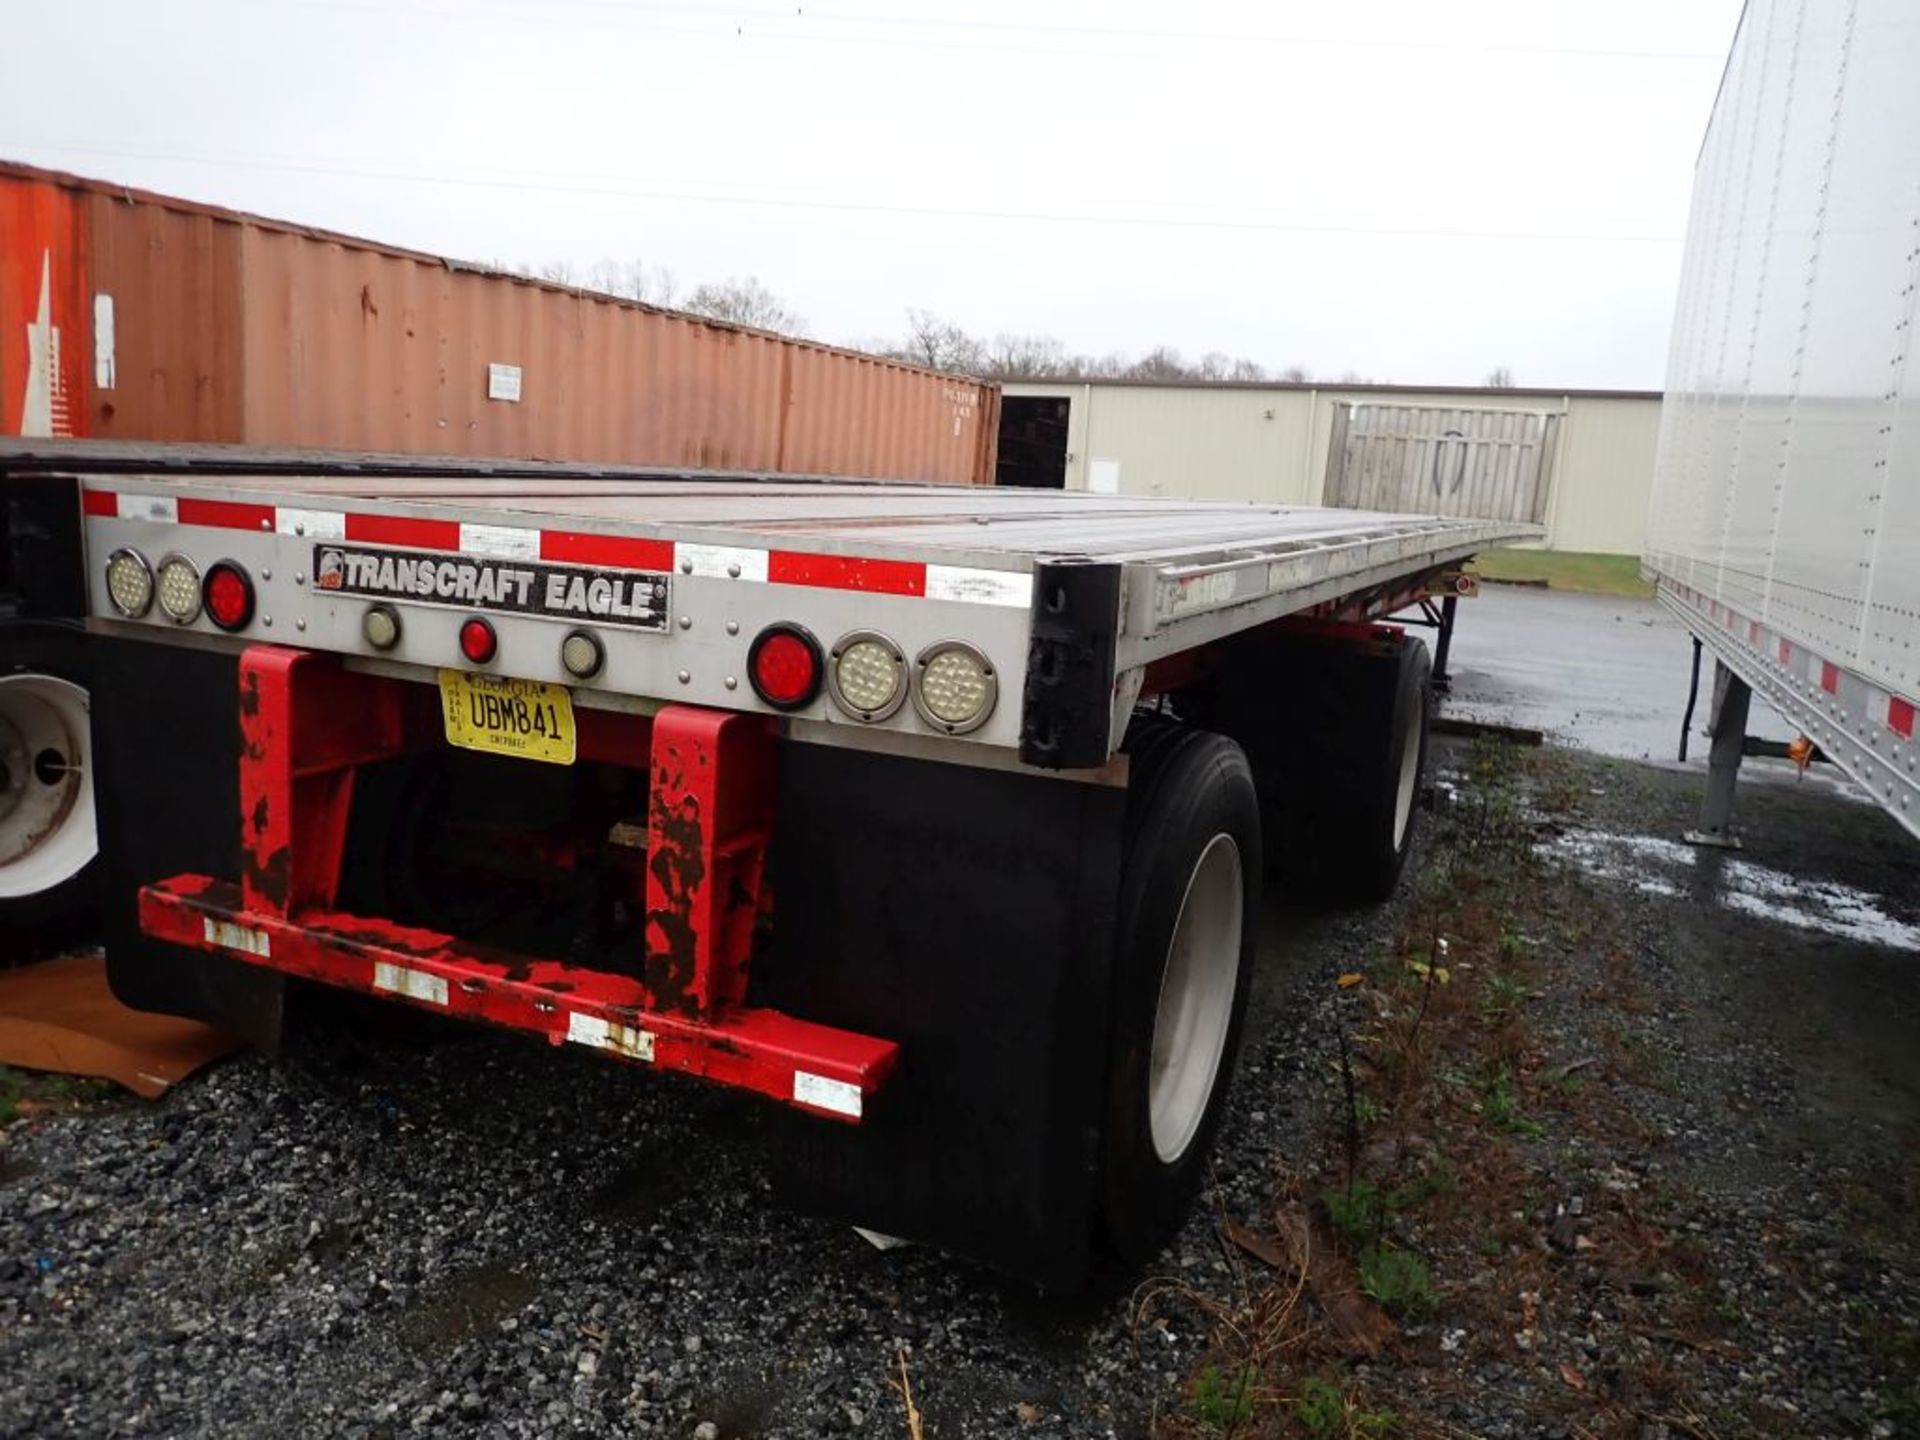 1998 Transcraft 48' Flatbed Trailer - Located in Spartanburg, SC - Image 7 of 17